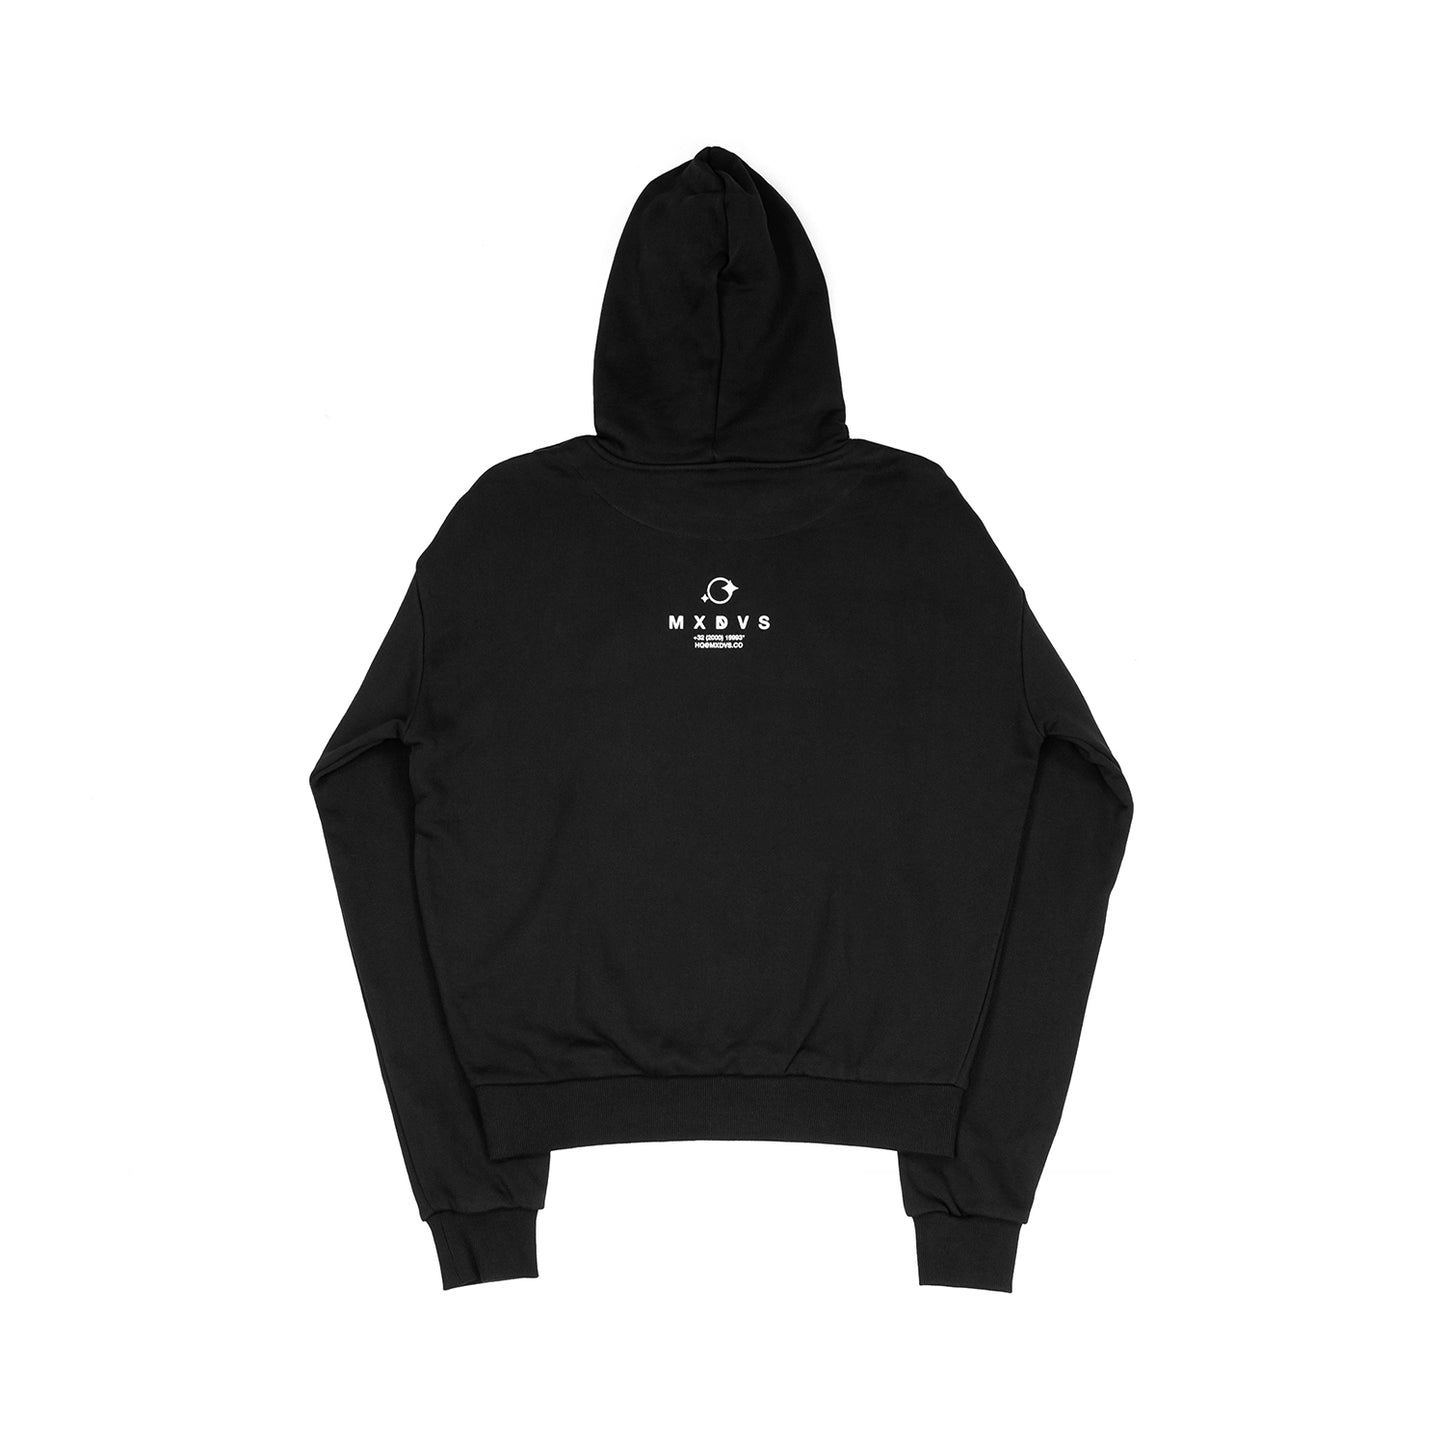 Rotten inside & out hoodie